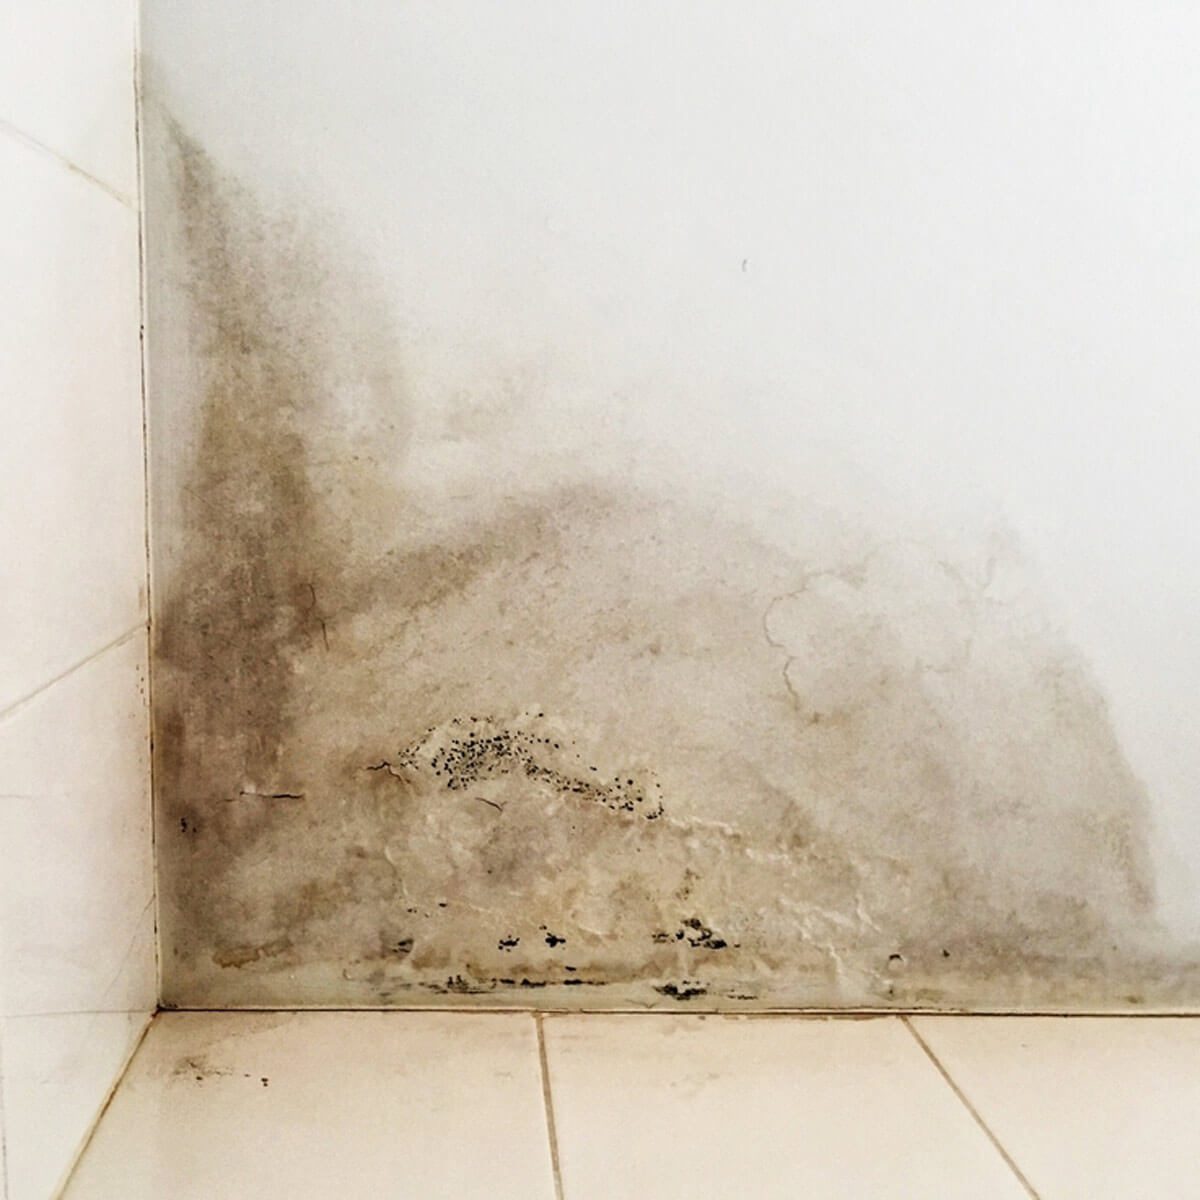 Inspect for Serious Issues like Mold